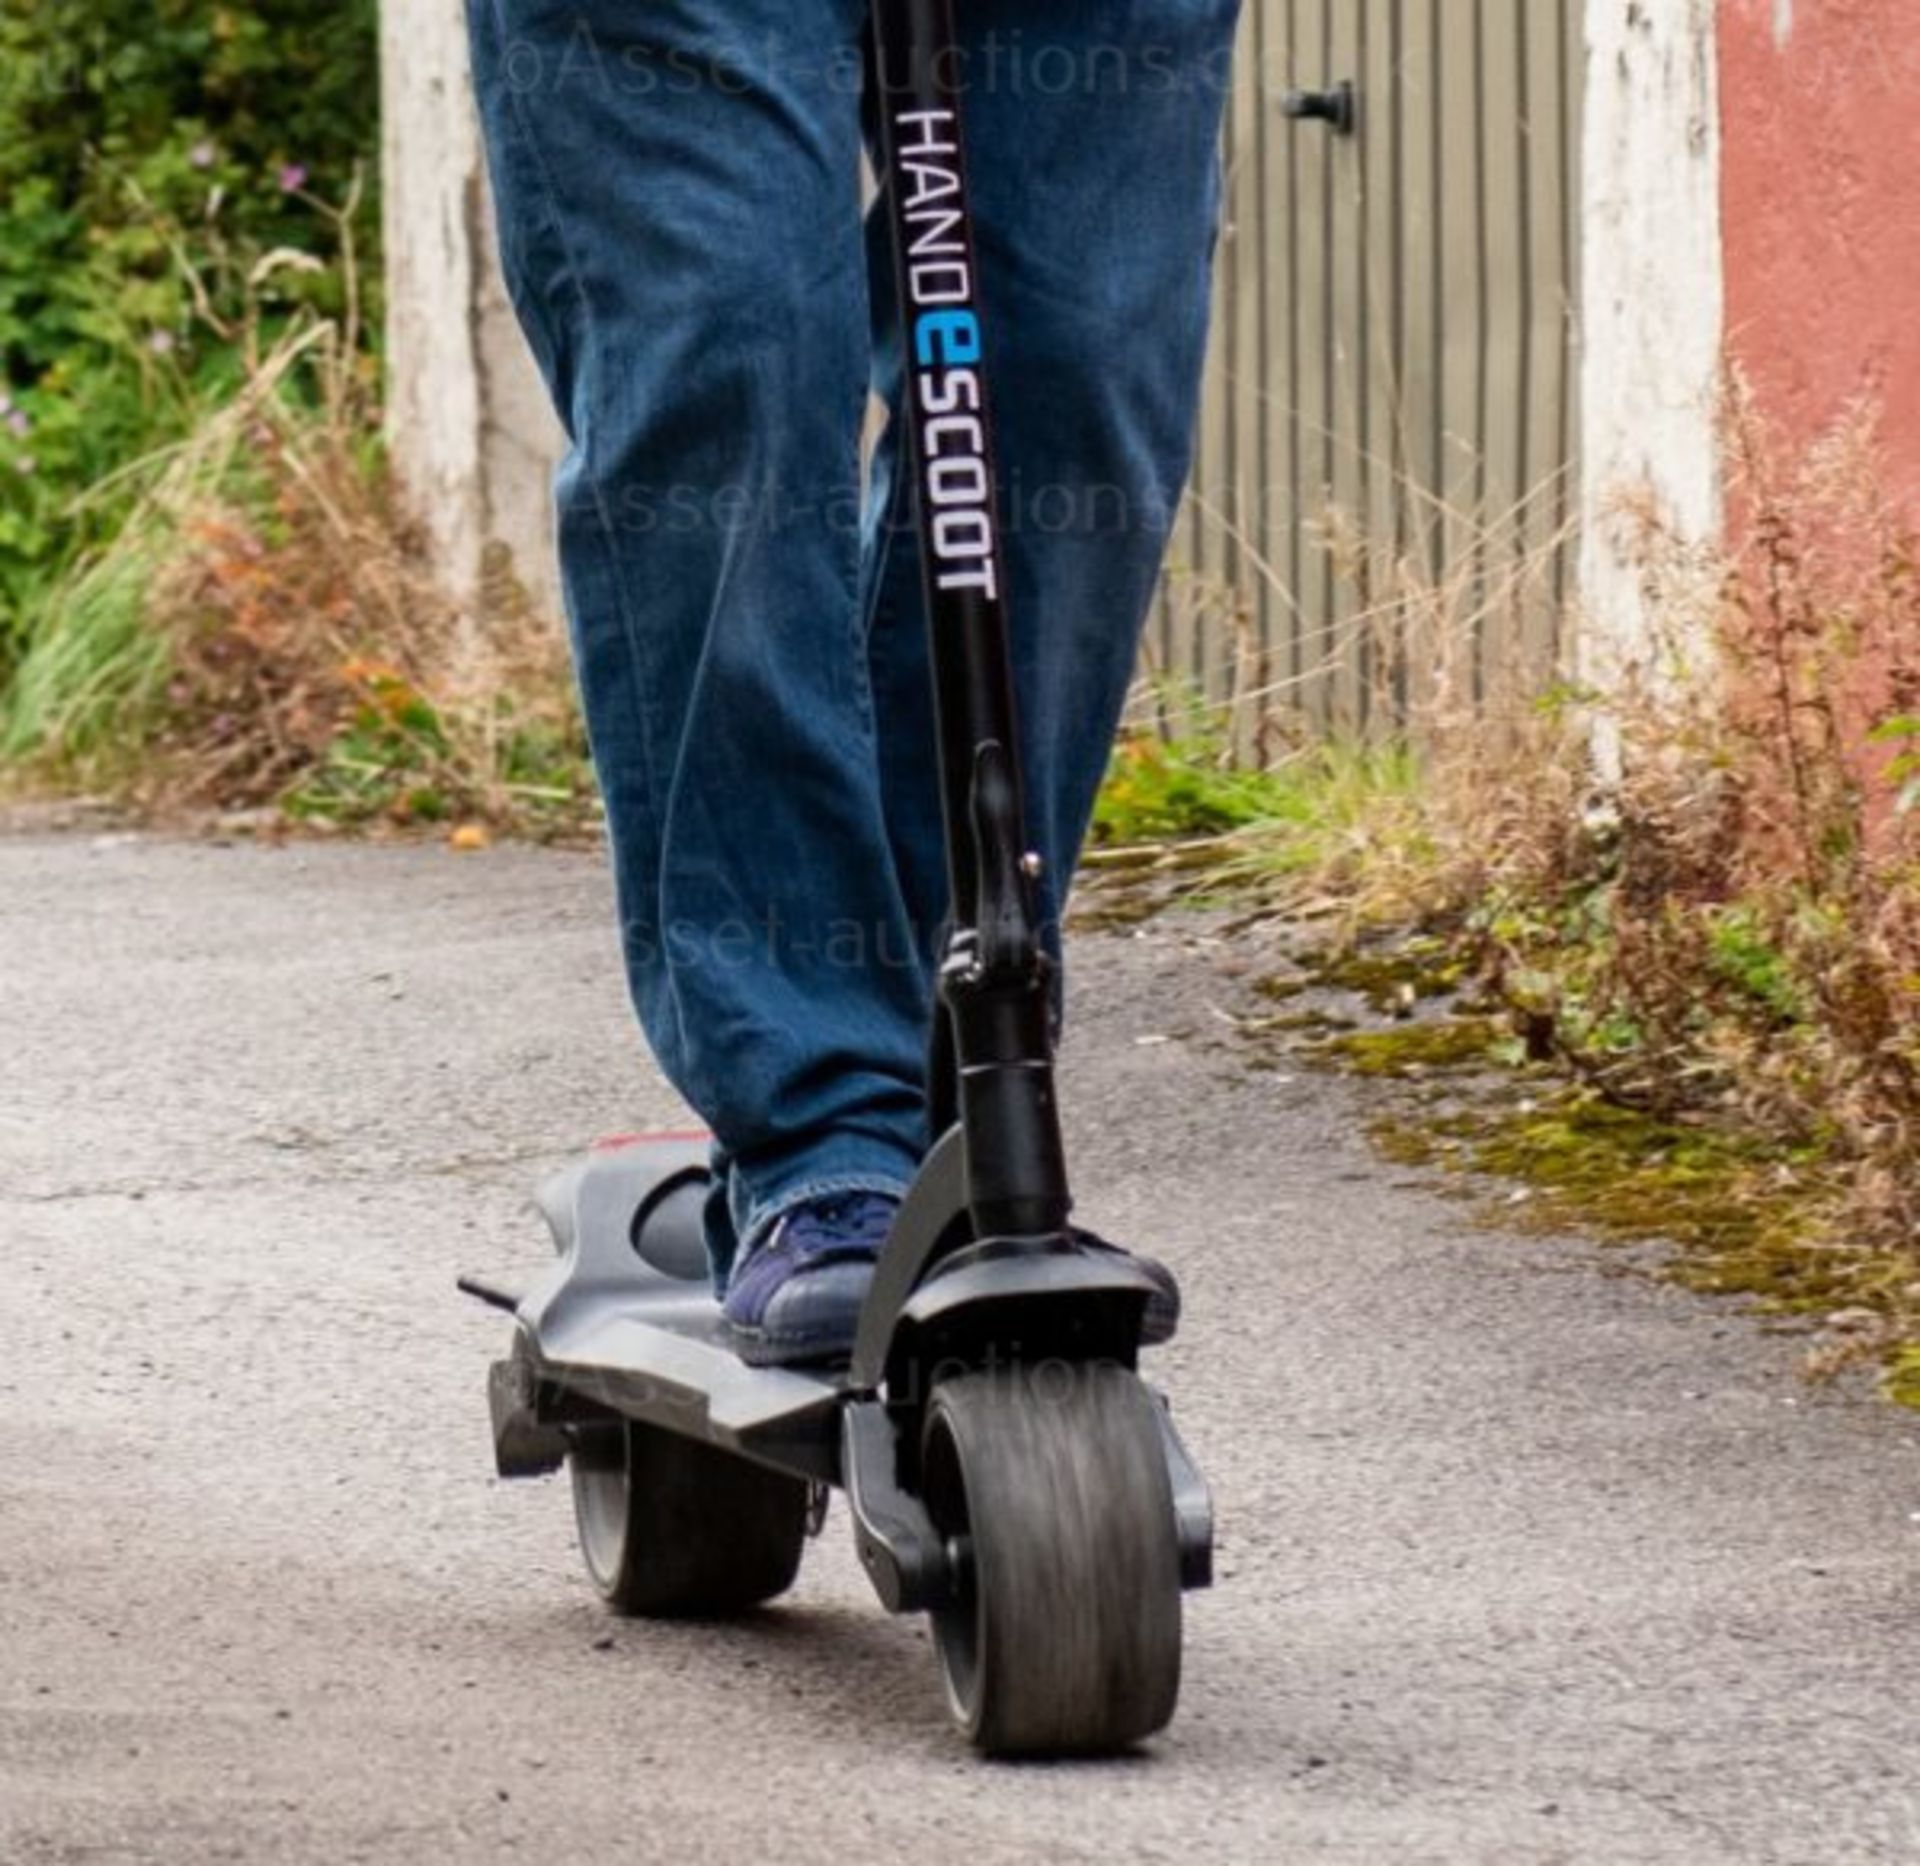 BRAND NEW HANDESCOOT ELECTRIC SCOOTER, WIDE WHEELS, £60 OF HANDESCOOT EXTRAS INCLUDED *PLUS VAT* - Image 4 of 6